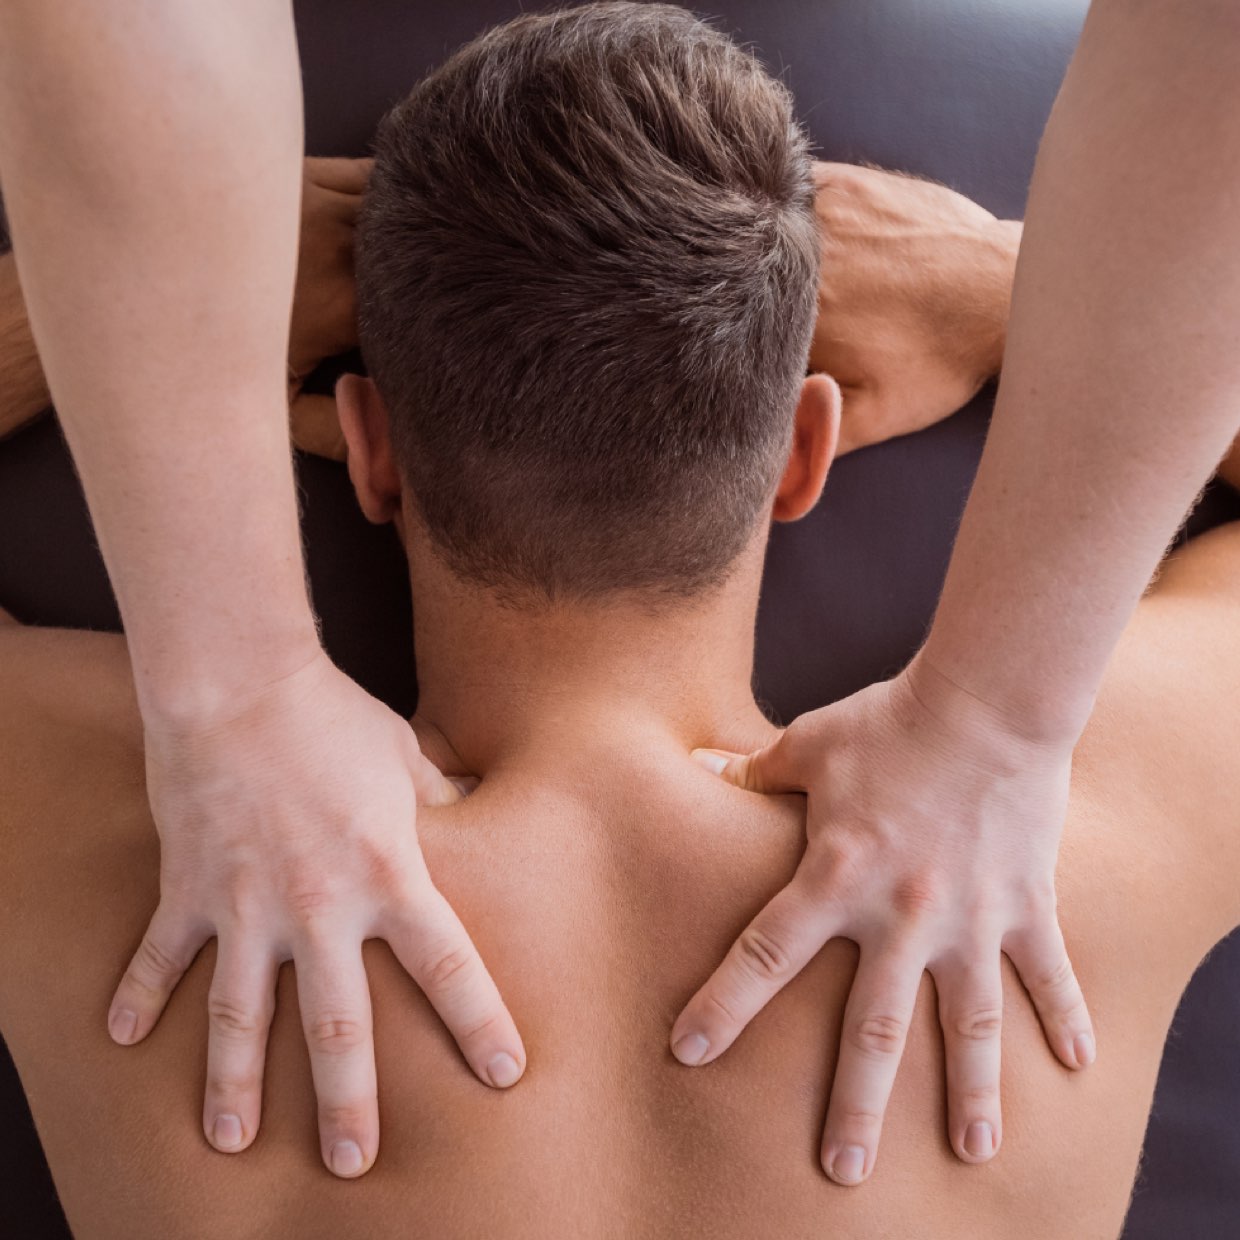 Massage therapy at the Foundry Clinic